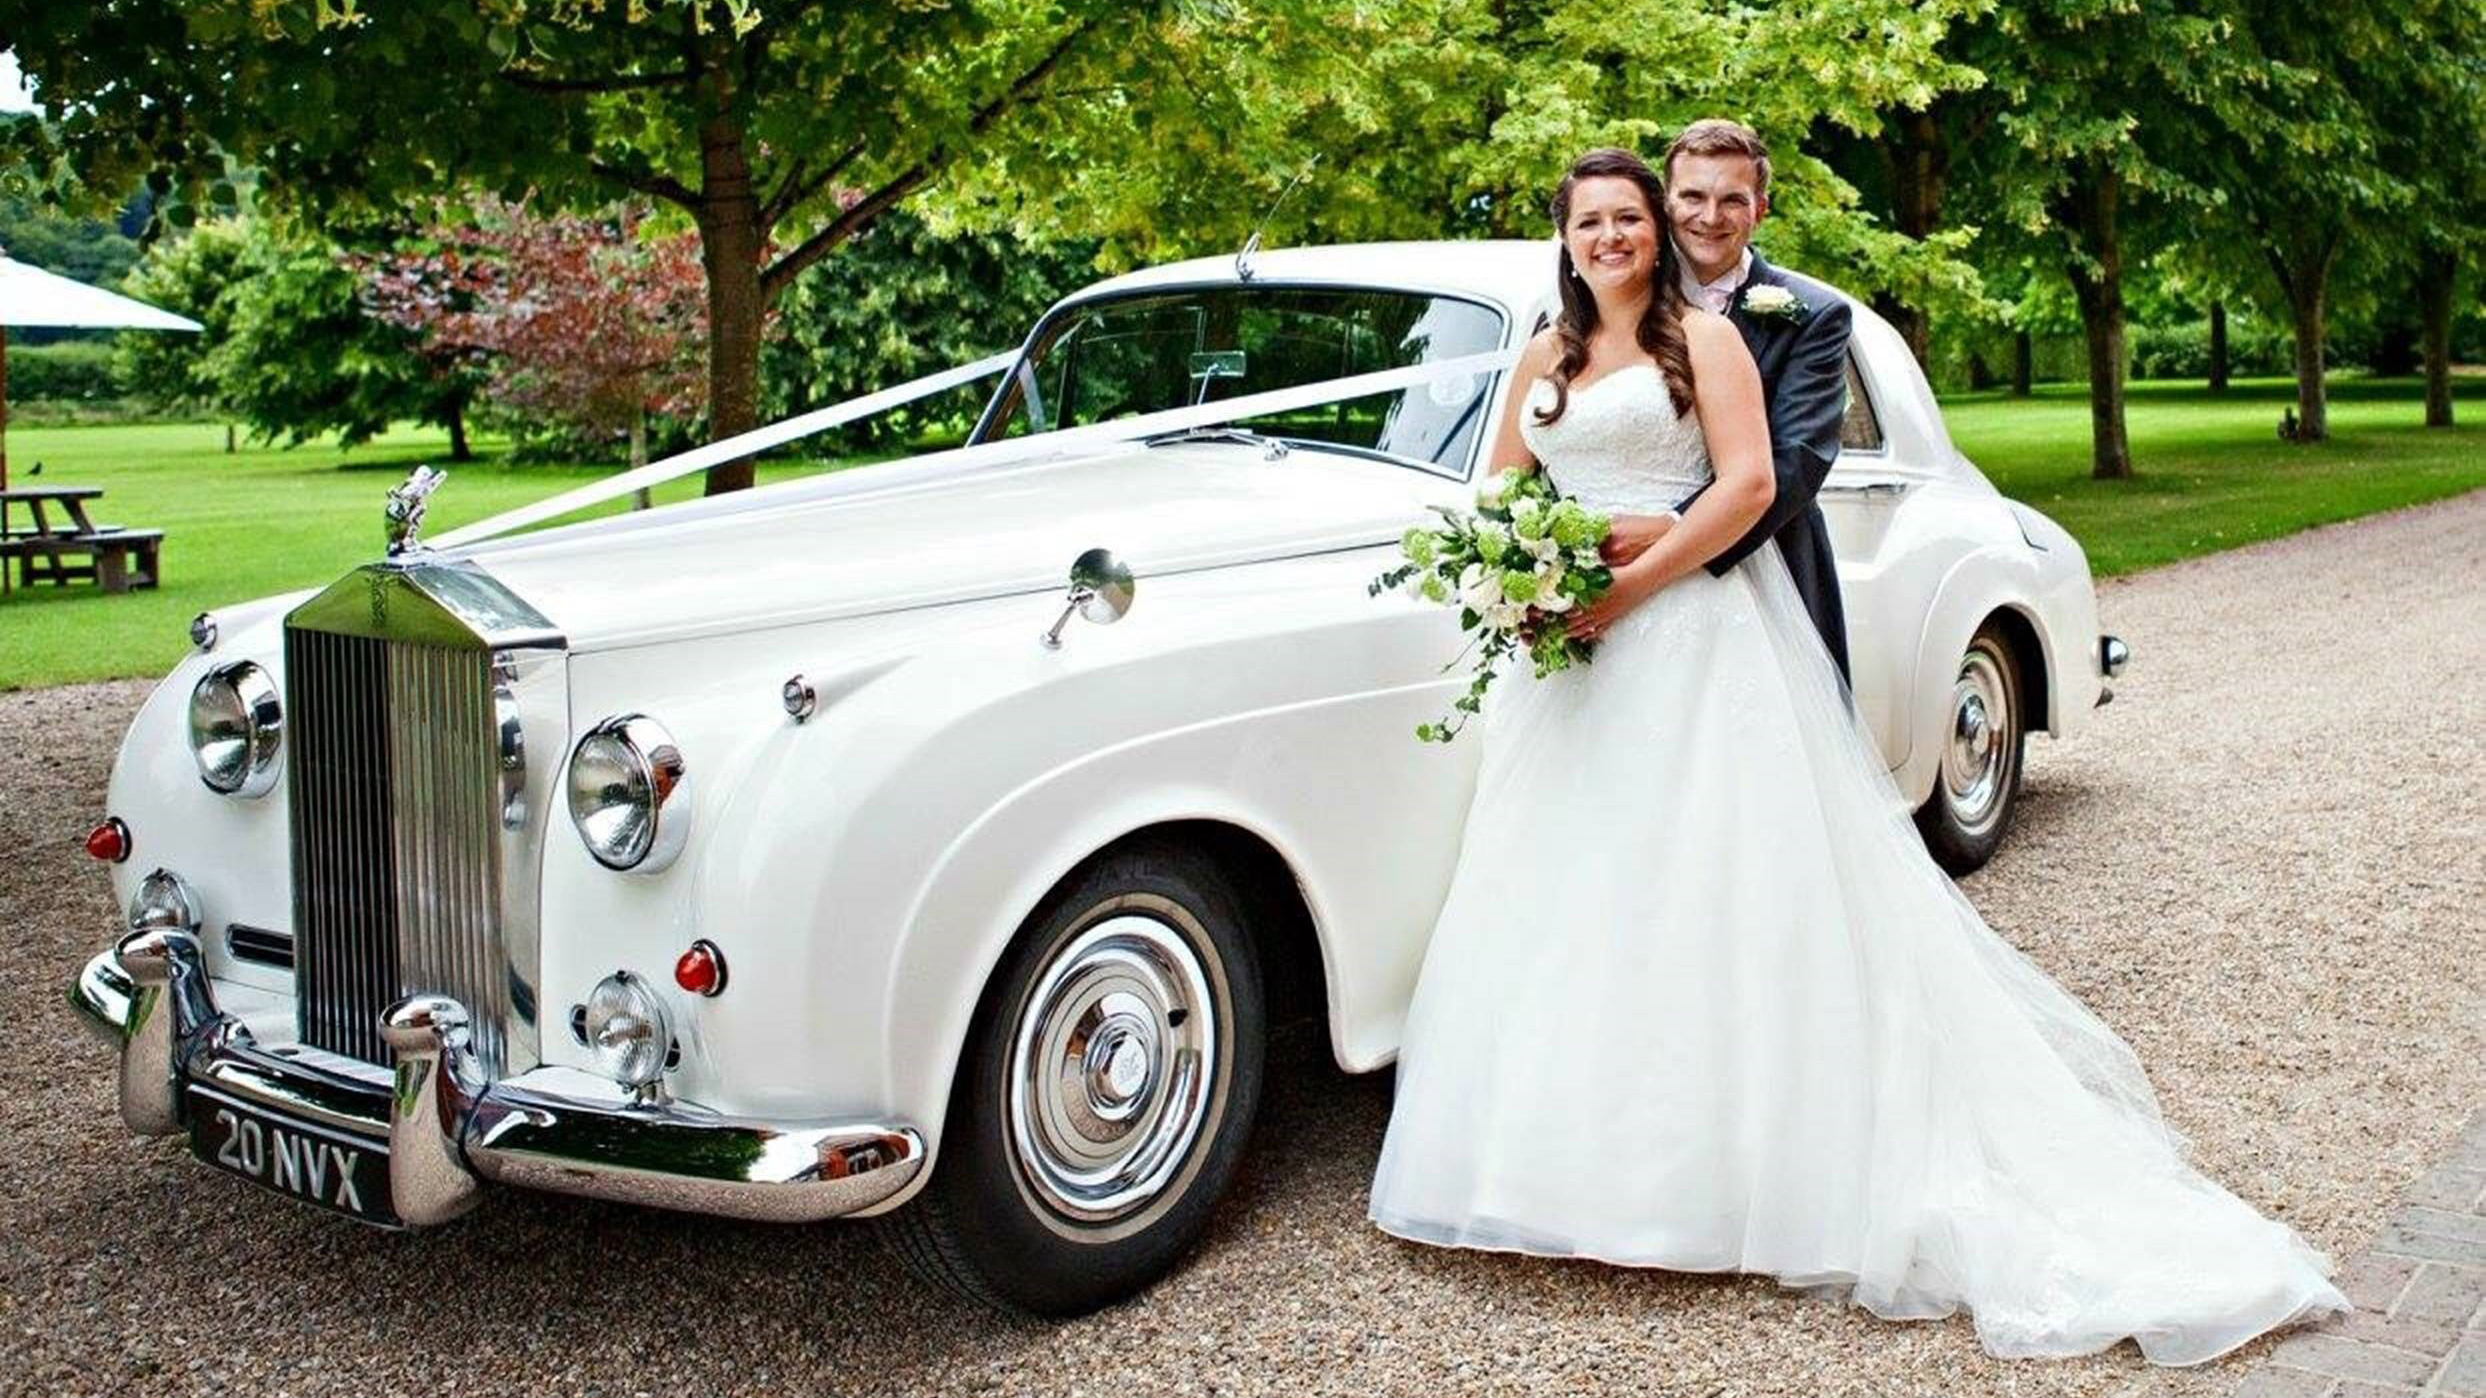 White Rolls-Royce Silver cloud decorated with ivory ribbons parked in the entrance of a wedding venue in Leighton Buzzard. Bride and Groom are standing by the vehicle. Groom is holding his Bride in his arms while she holds her bridal bouquet.